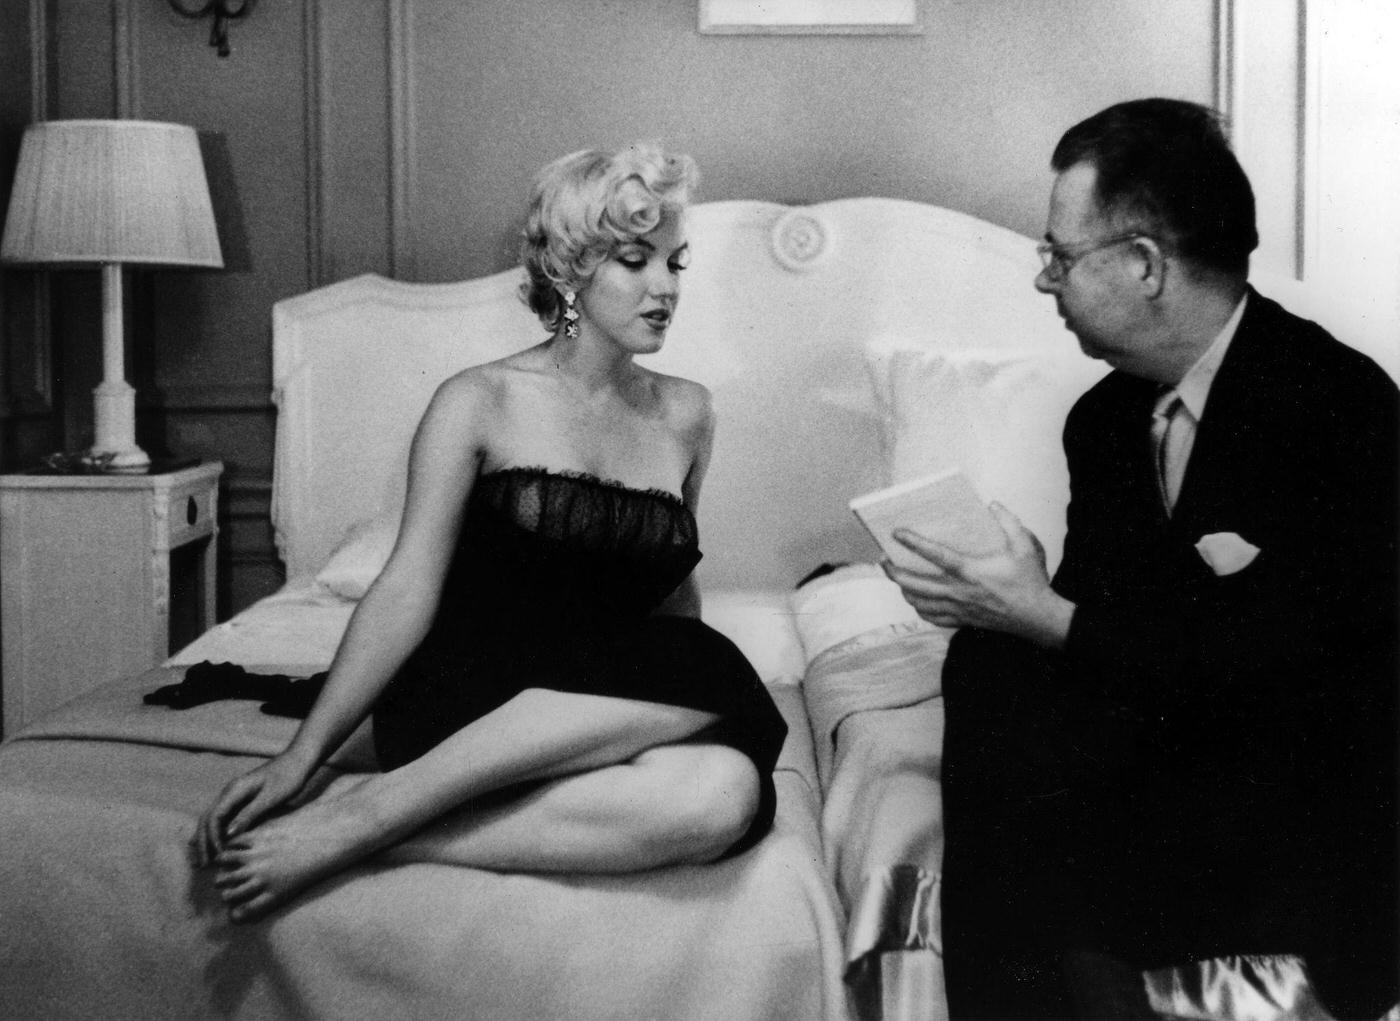 Marilyn Monroe speaks to a reporter at a press party for "The Seven Year Itch" in 1954 in New York